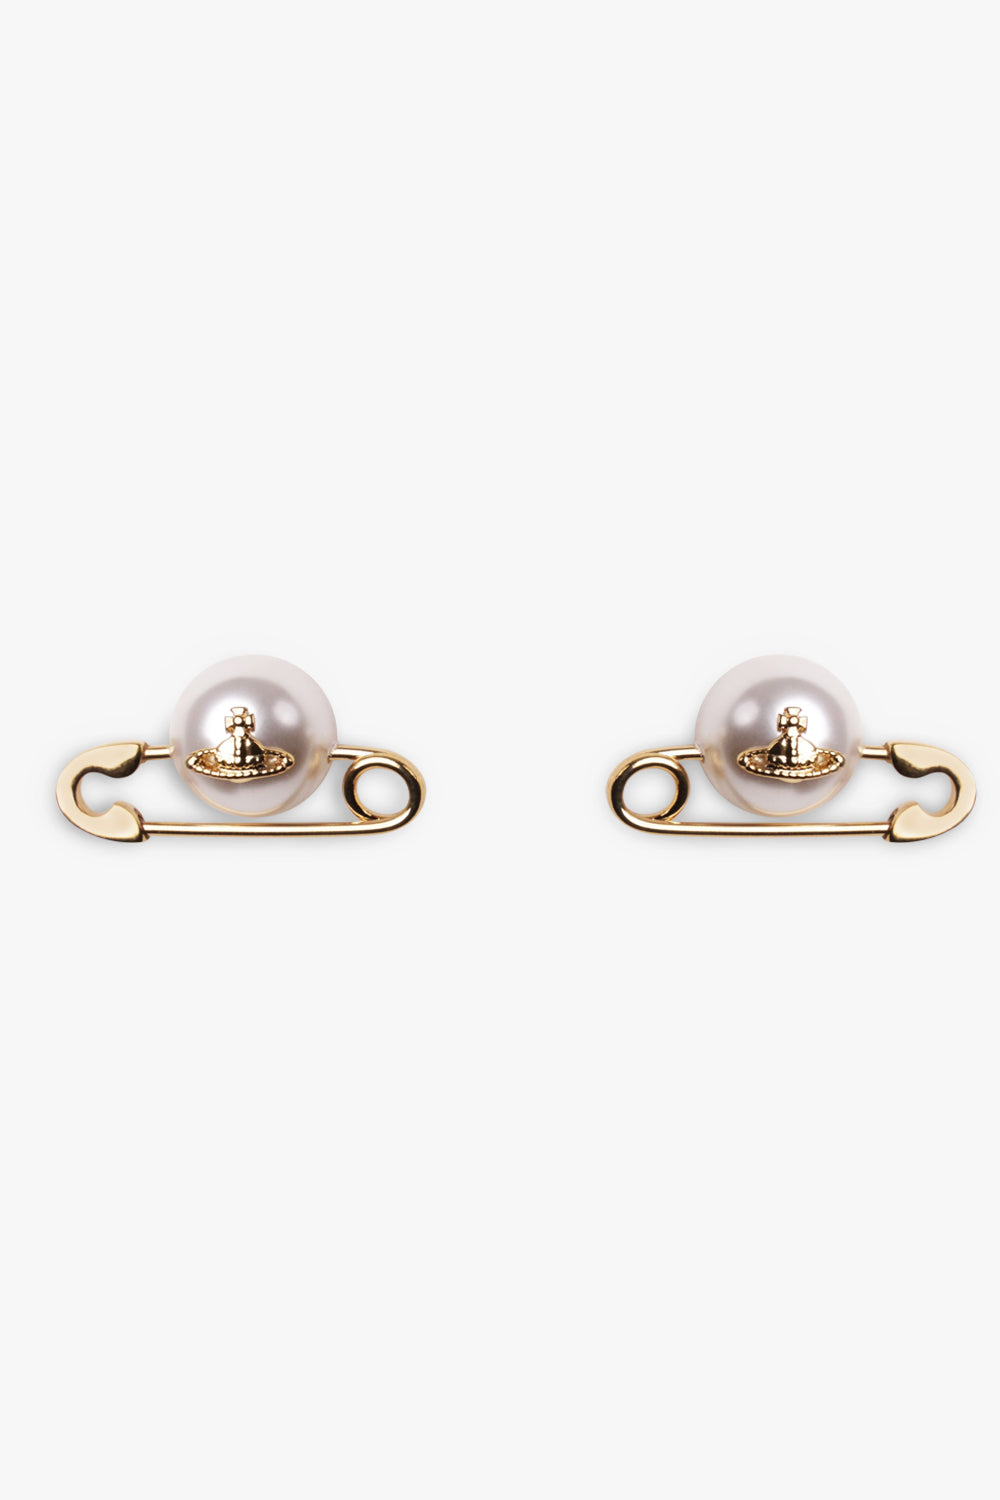 VIVIENNE WESTWOOD JEWELLRY GOLD / GOLD JORDAN SAFETY PIN PEARL EARRINGS | GOLD